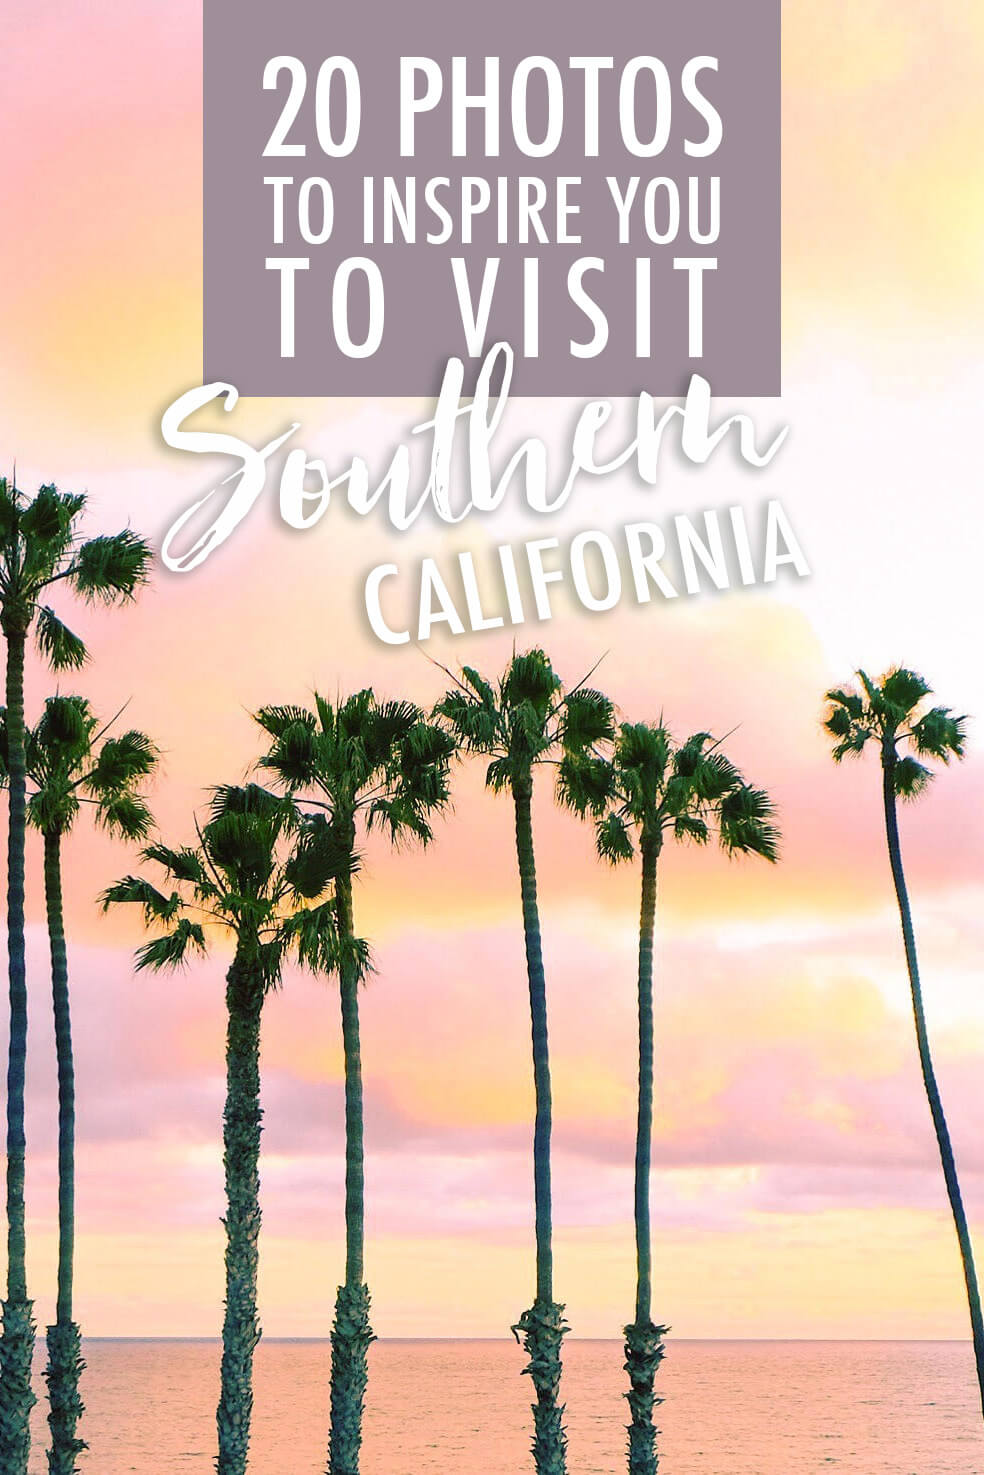 Photos to Inspire You to Visit Southern California